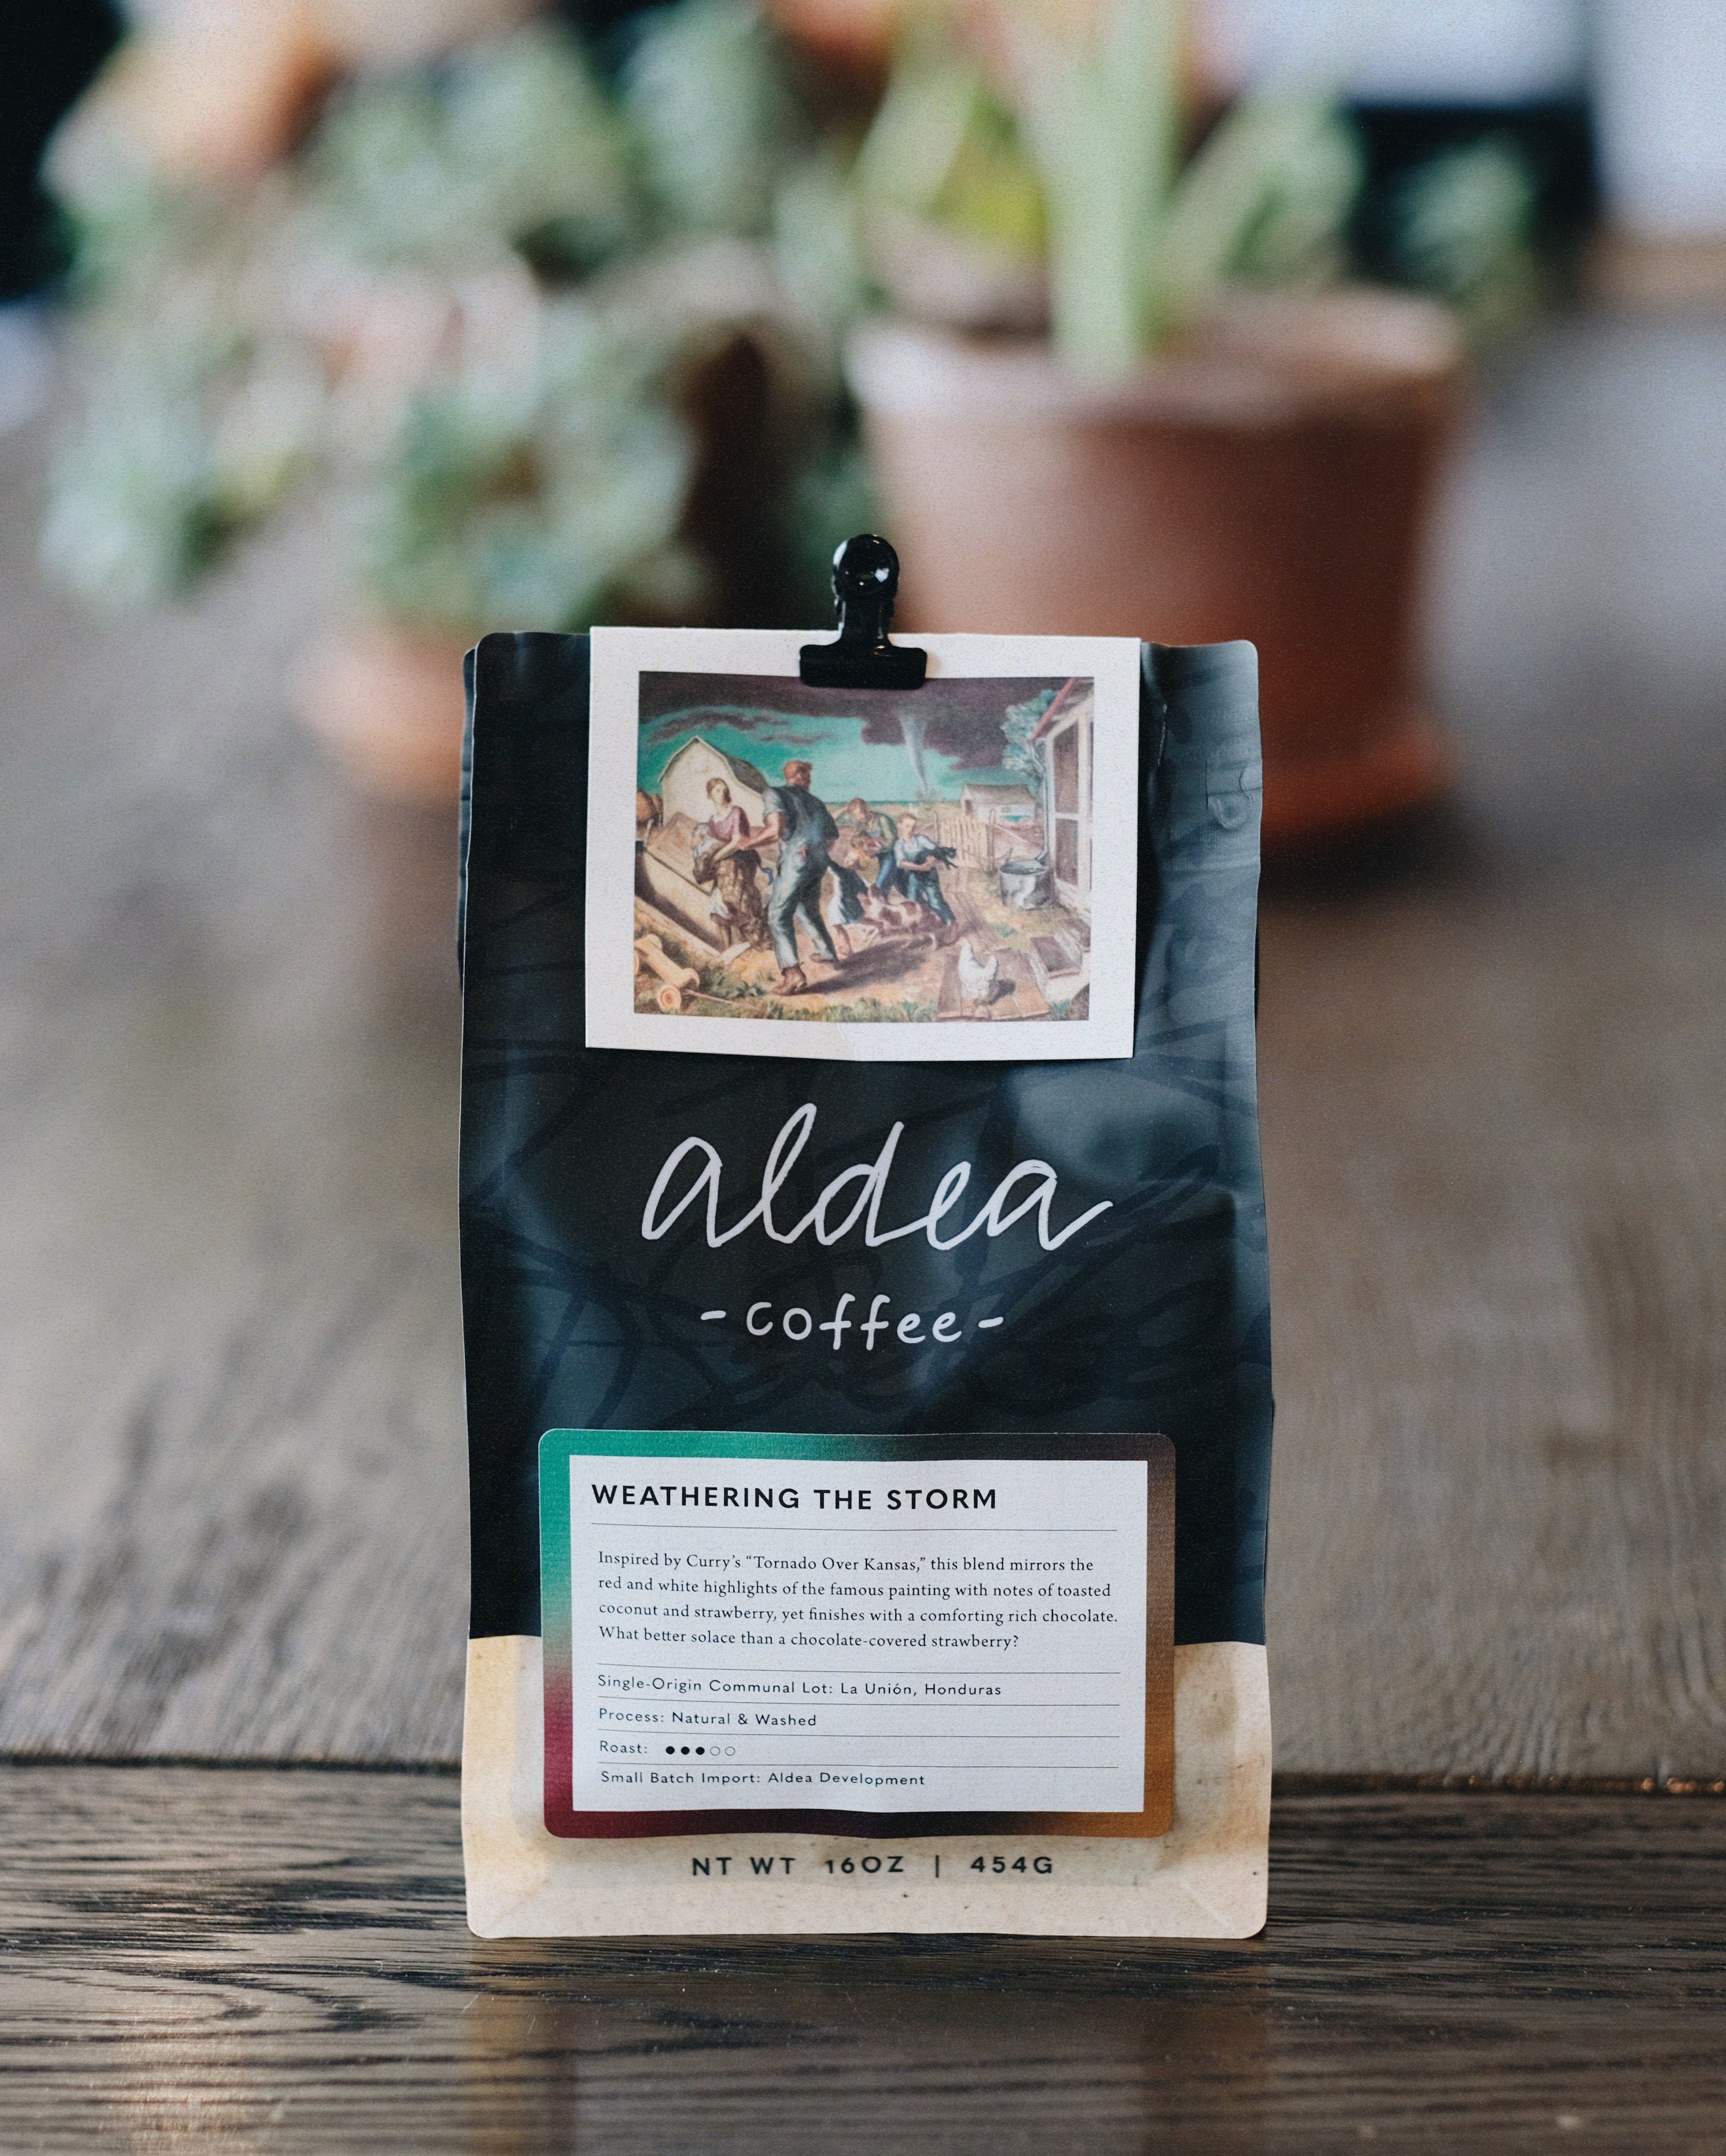 Bag of Aldea Coffee featuring the text: Weathering The Storm"